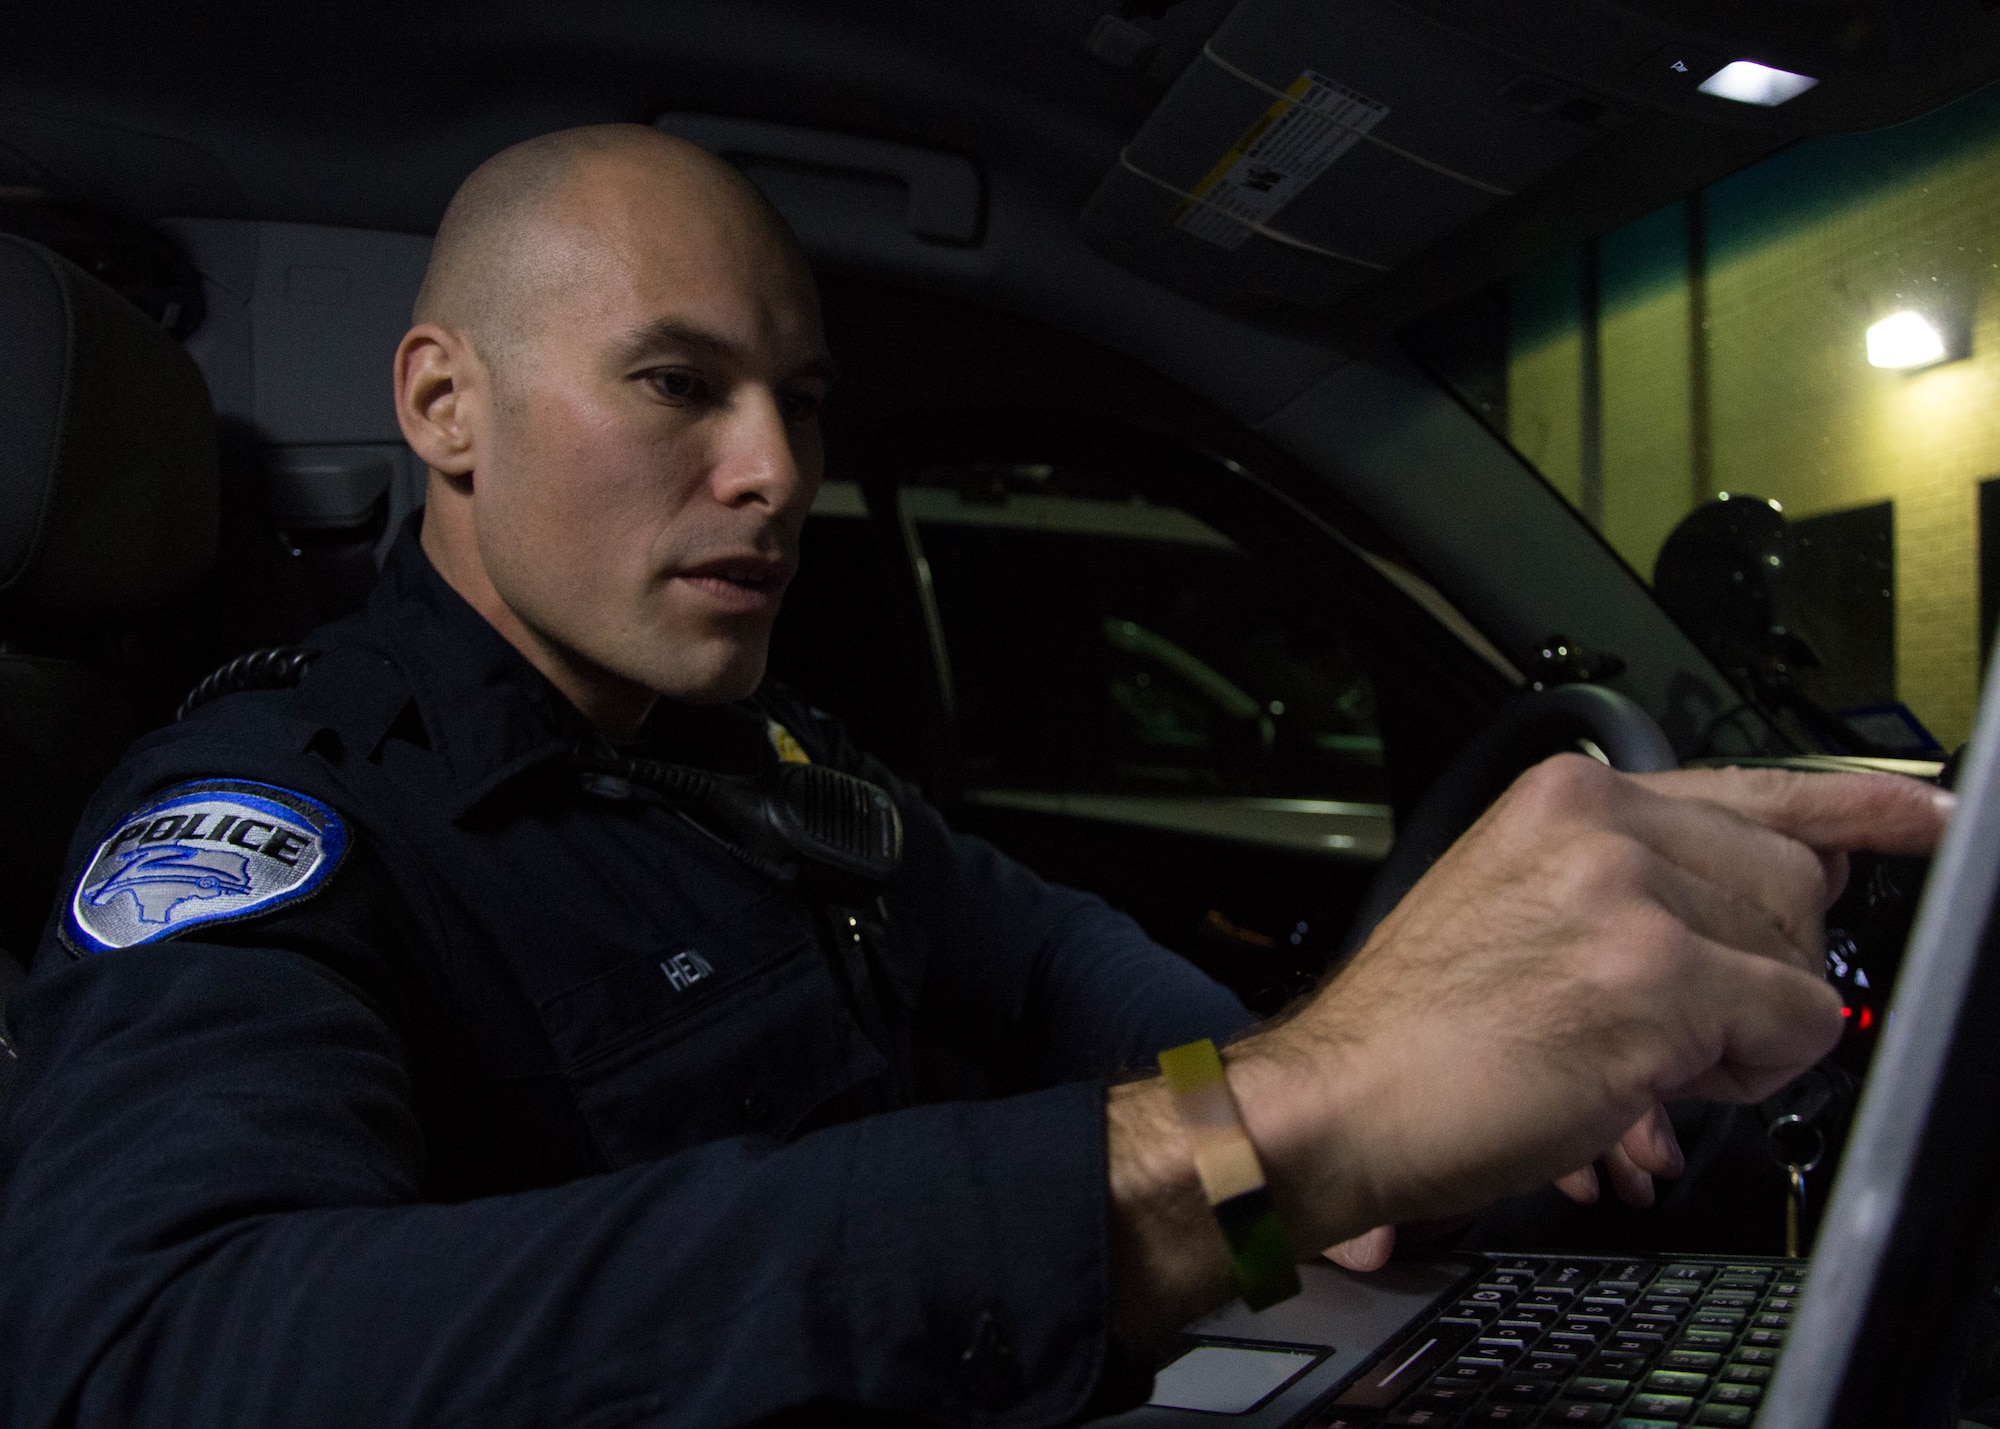 Steven Hein, a police officer with the Richardson Police Department, inspects his vehicle prior to a patrol in Richardson, Texas, Jan. 28, 2016. Hein will be a two-time competitor at the 2016 Best Warrior Competition. (Texas Air National Guard photo by Tech. Sgt. Vanessa Reed/ Released)